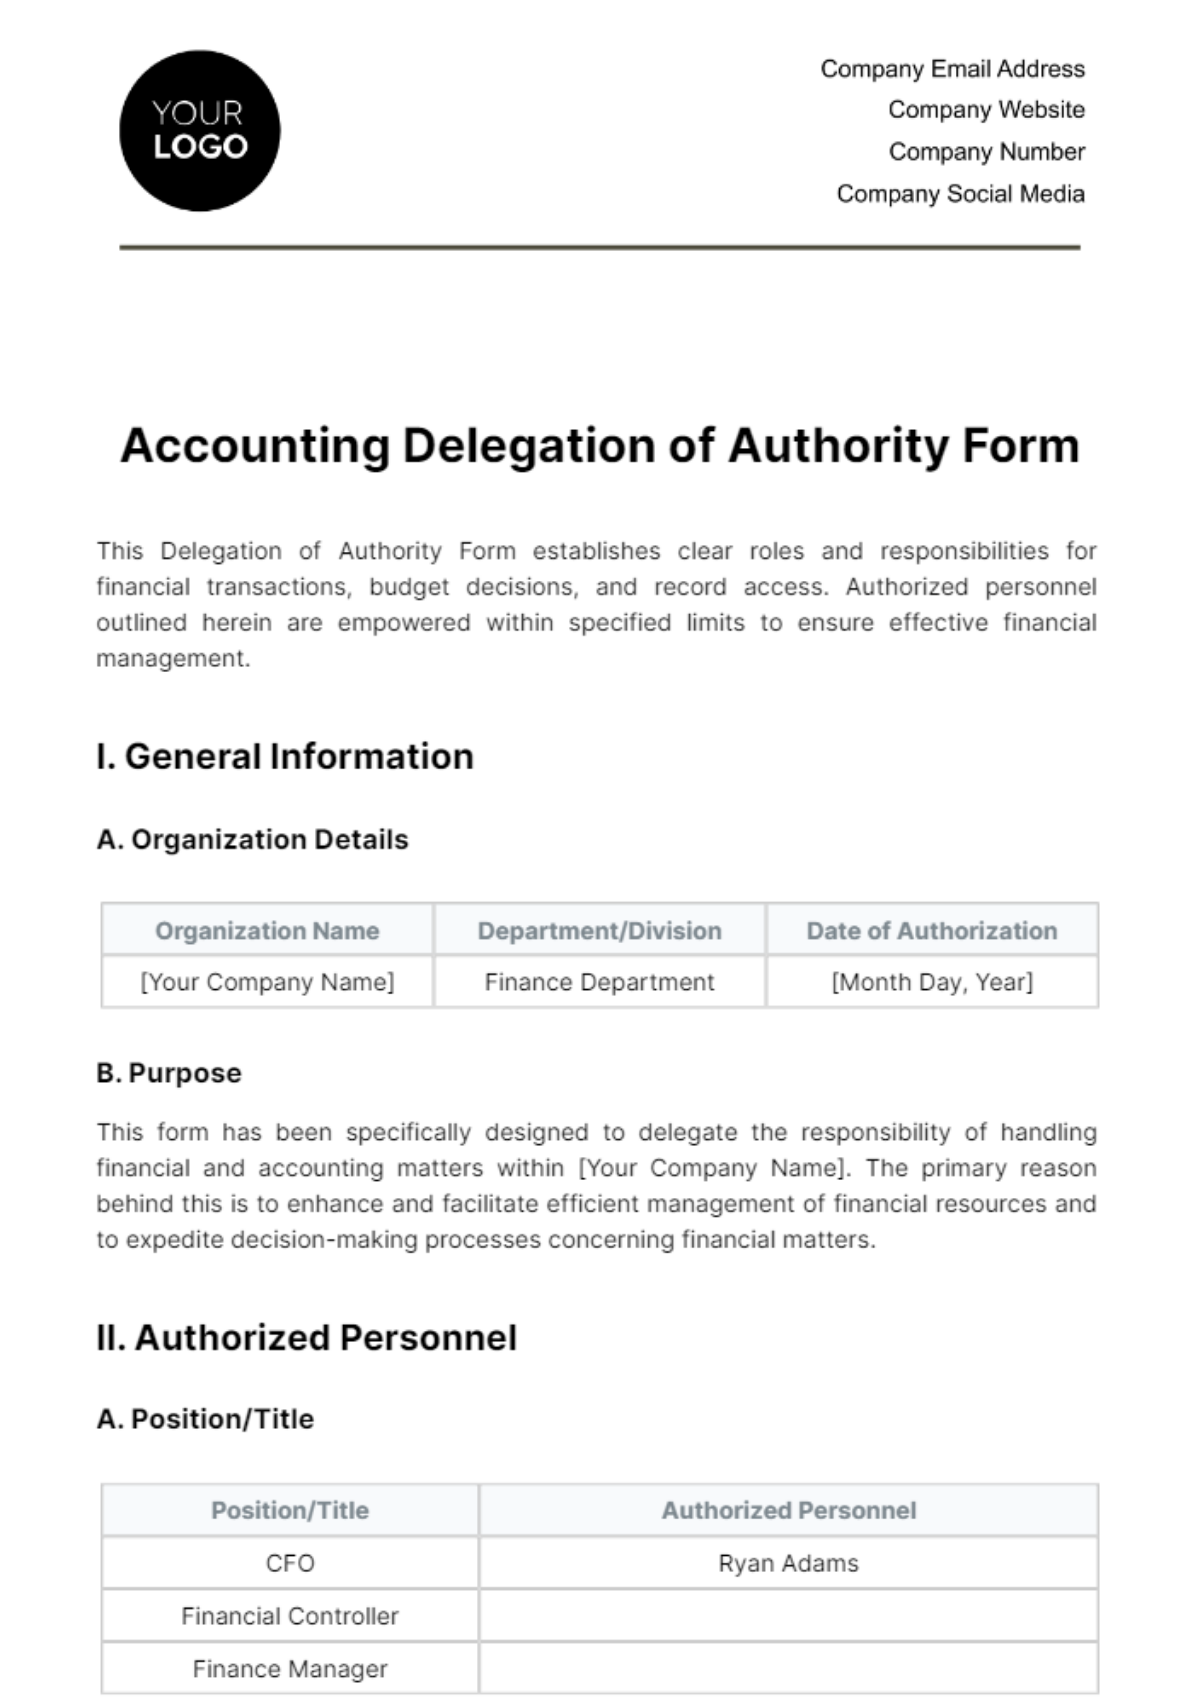 Accounting Delegation of Authority Form Template